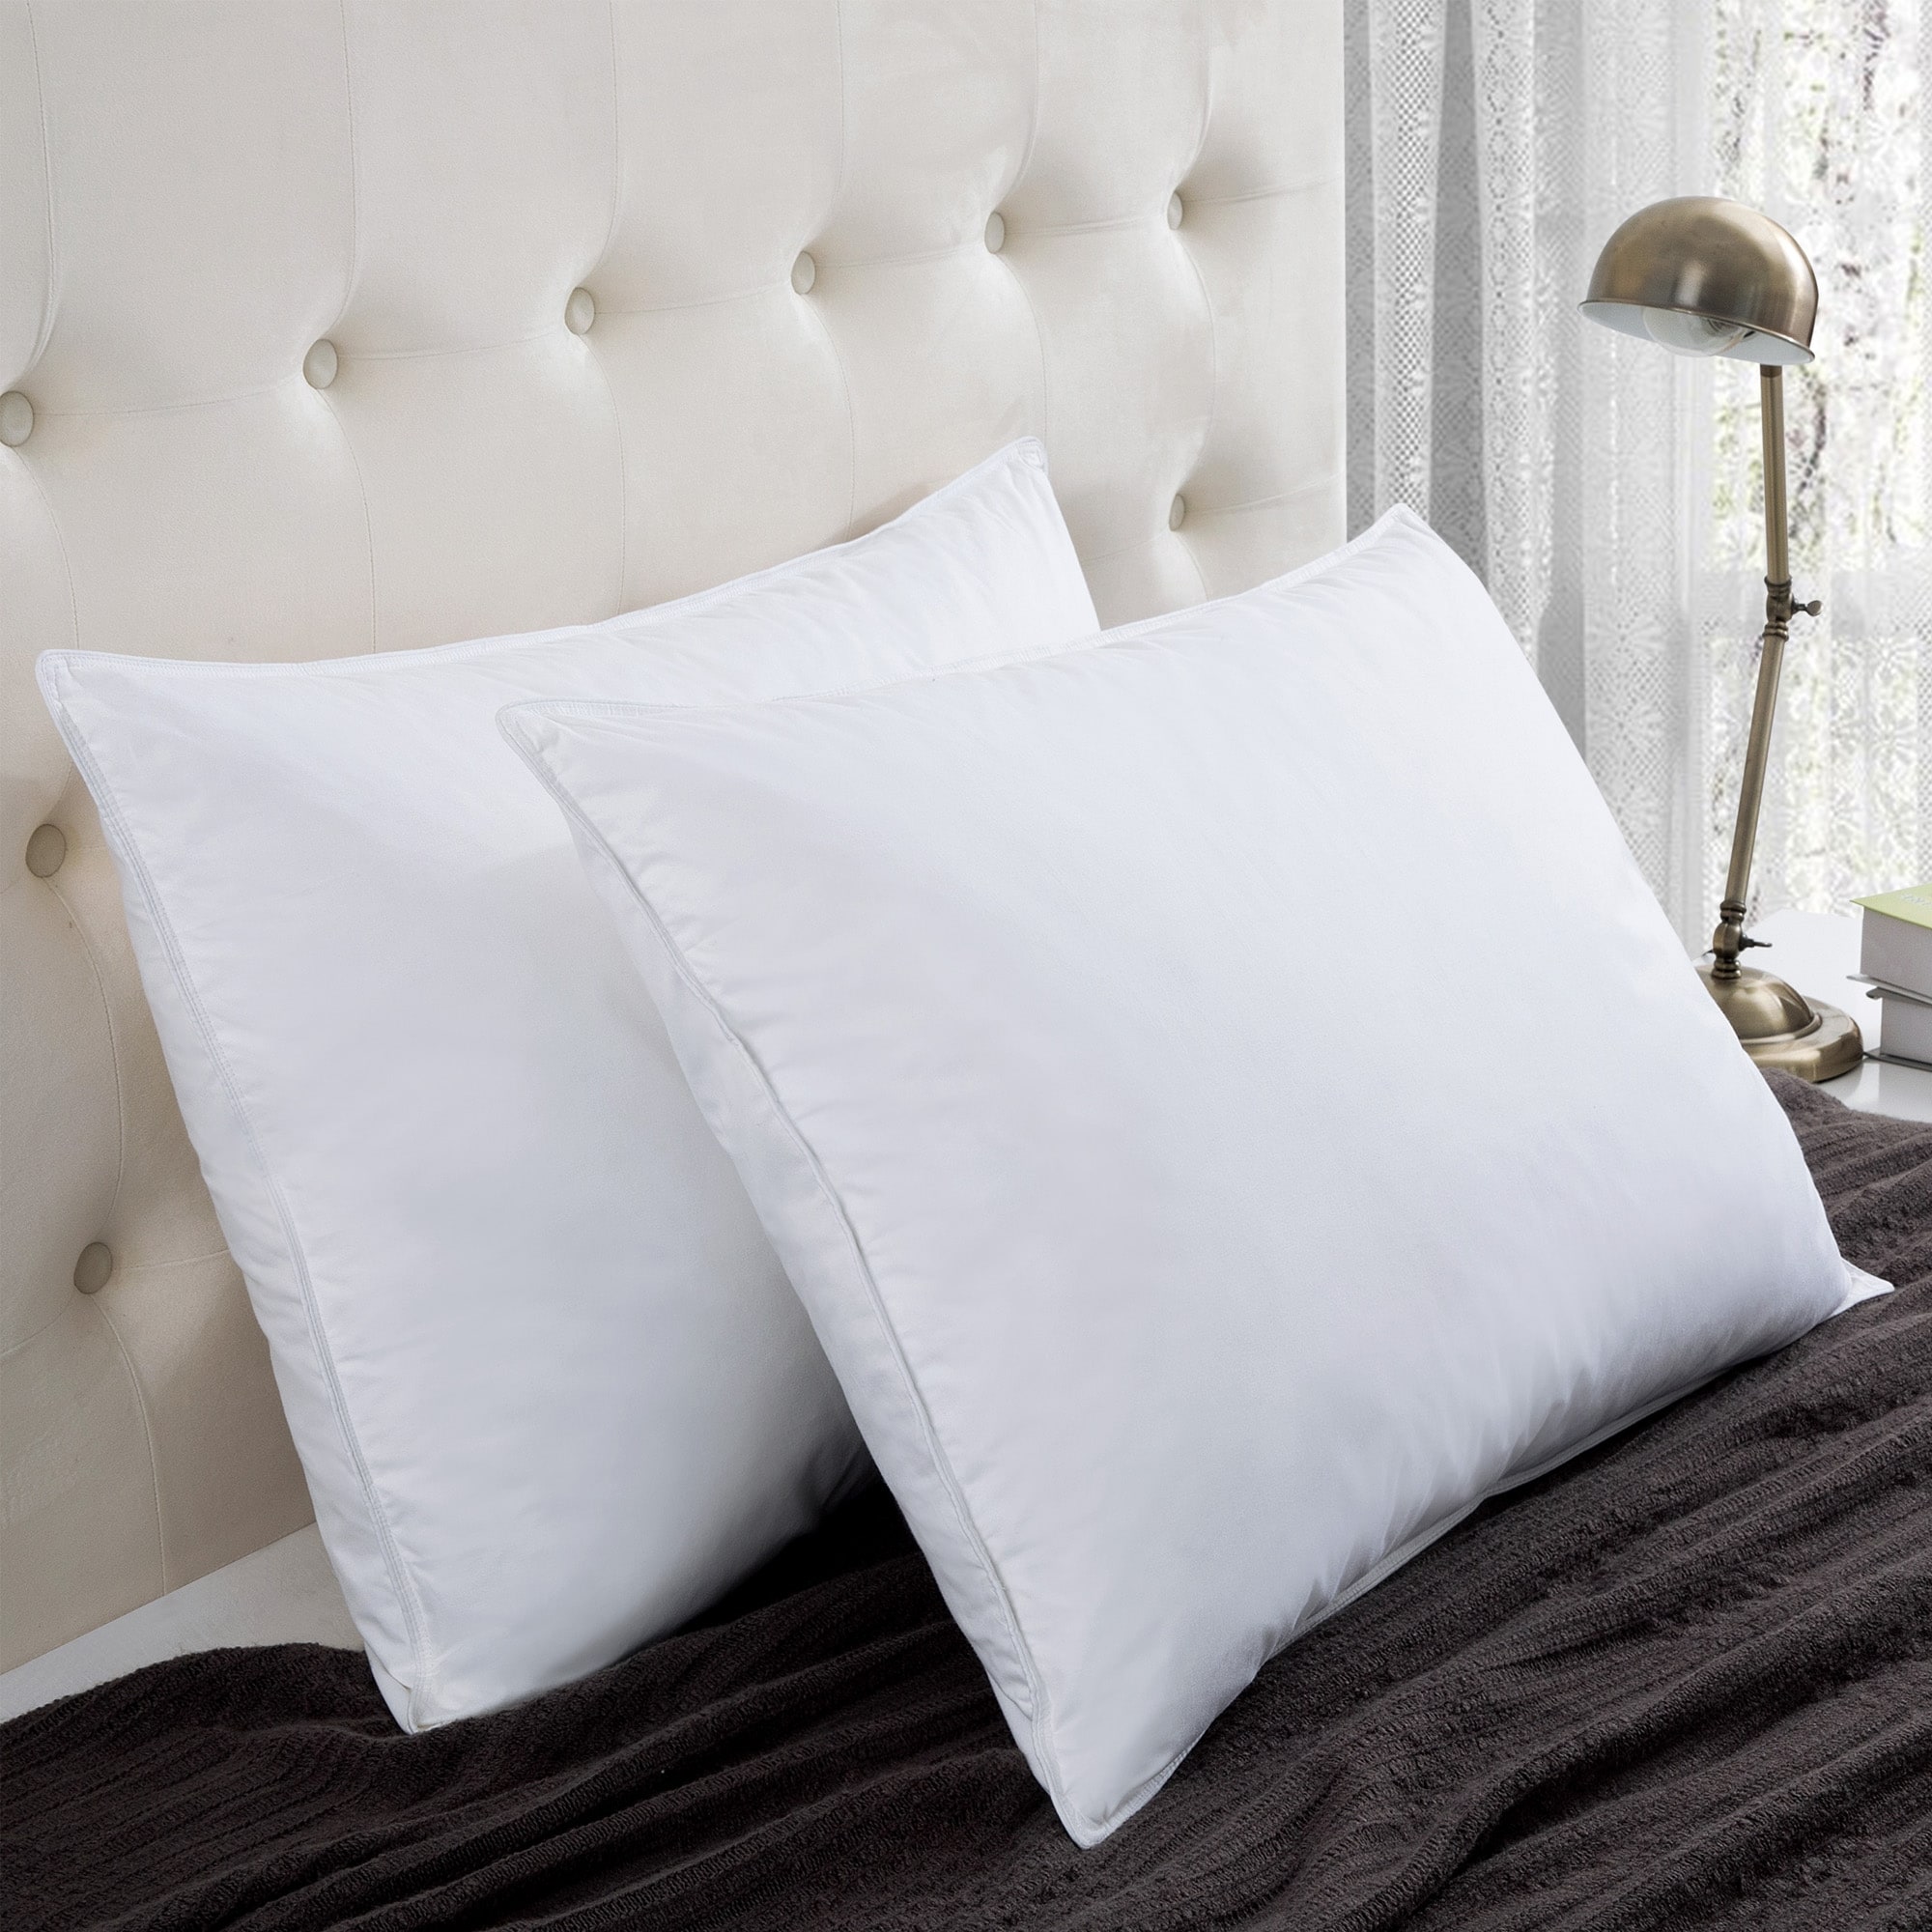 https://ak1.ostkcdn.com/images/products/is/images/direct/1f83f73011845168a4d0701fd80908dc65d74e4b/2-Pack-Goose-Feather-and-Down-Pillows-for-Side-%26-Back-Sleepers.jpg